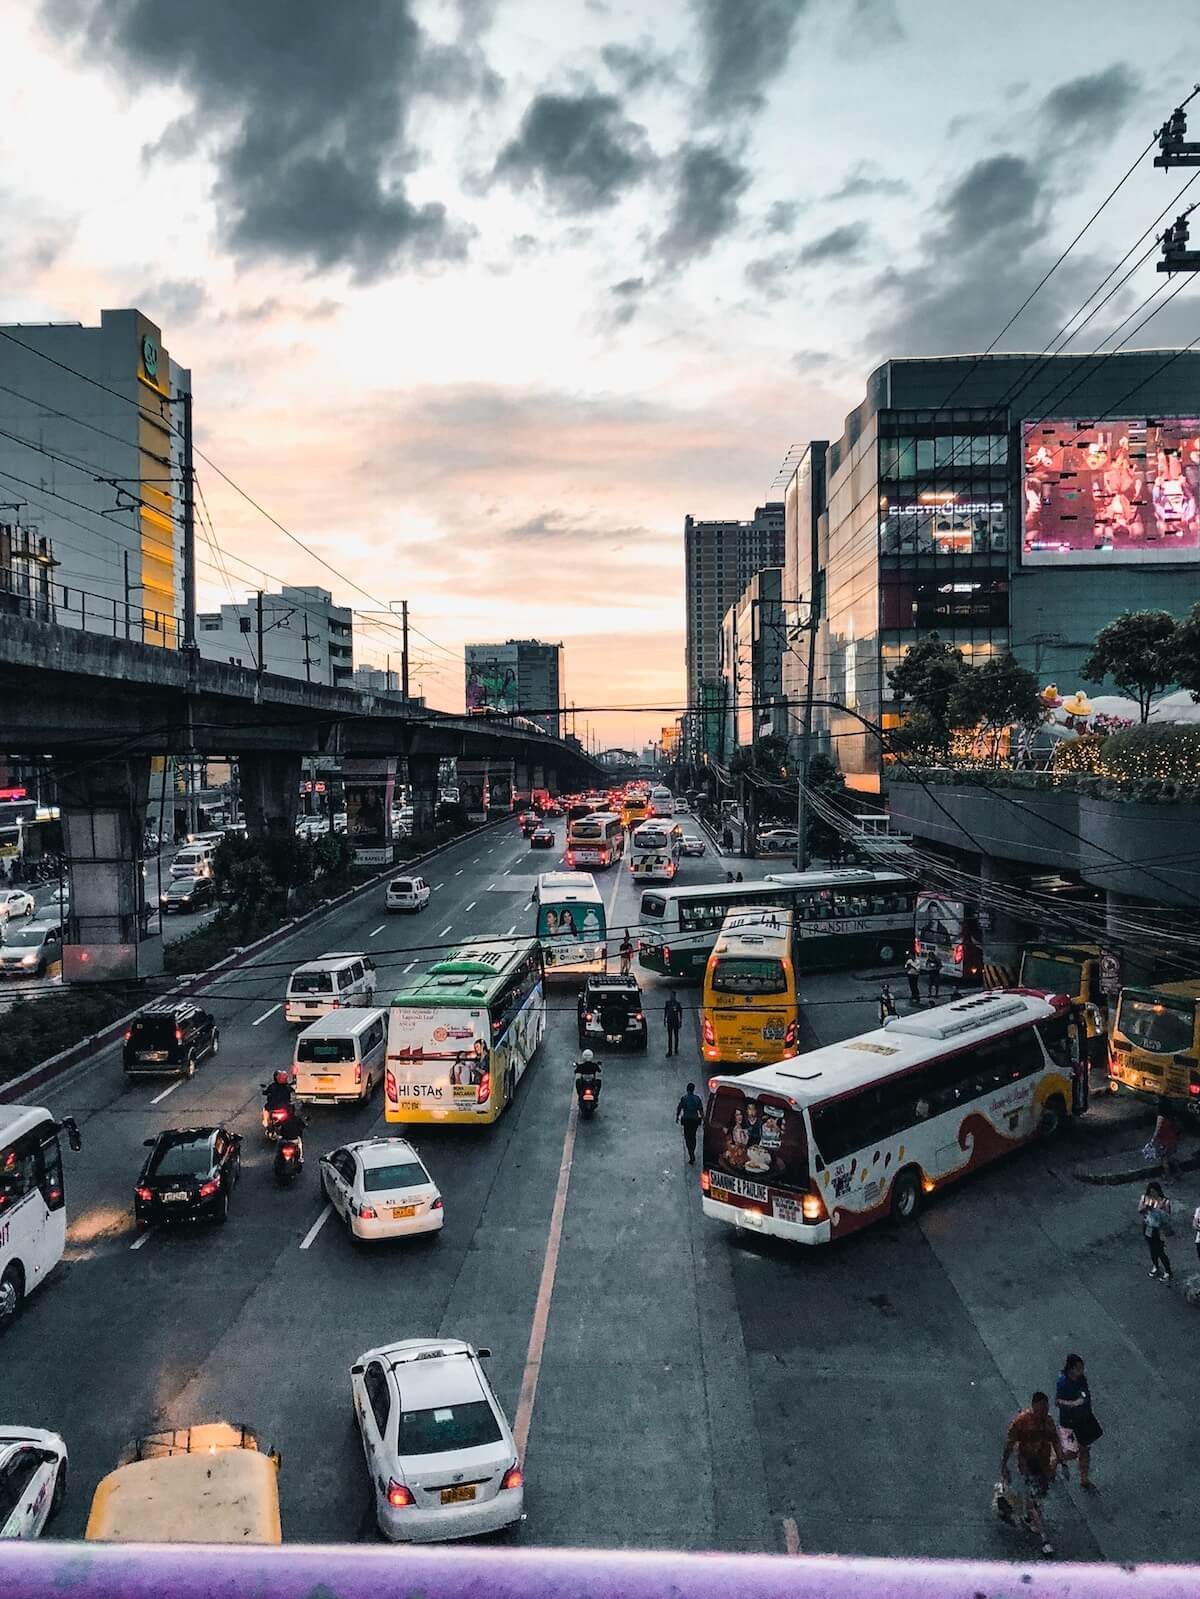 Use Tagalog words and phrases when commuting in Manila